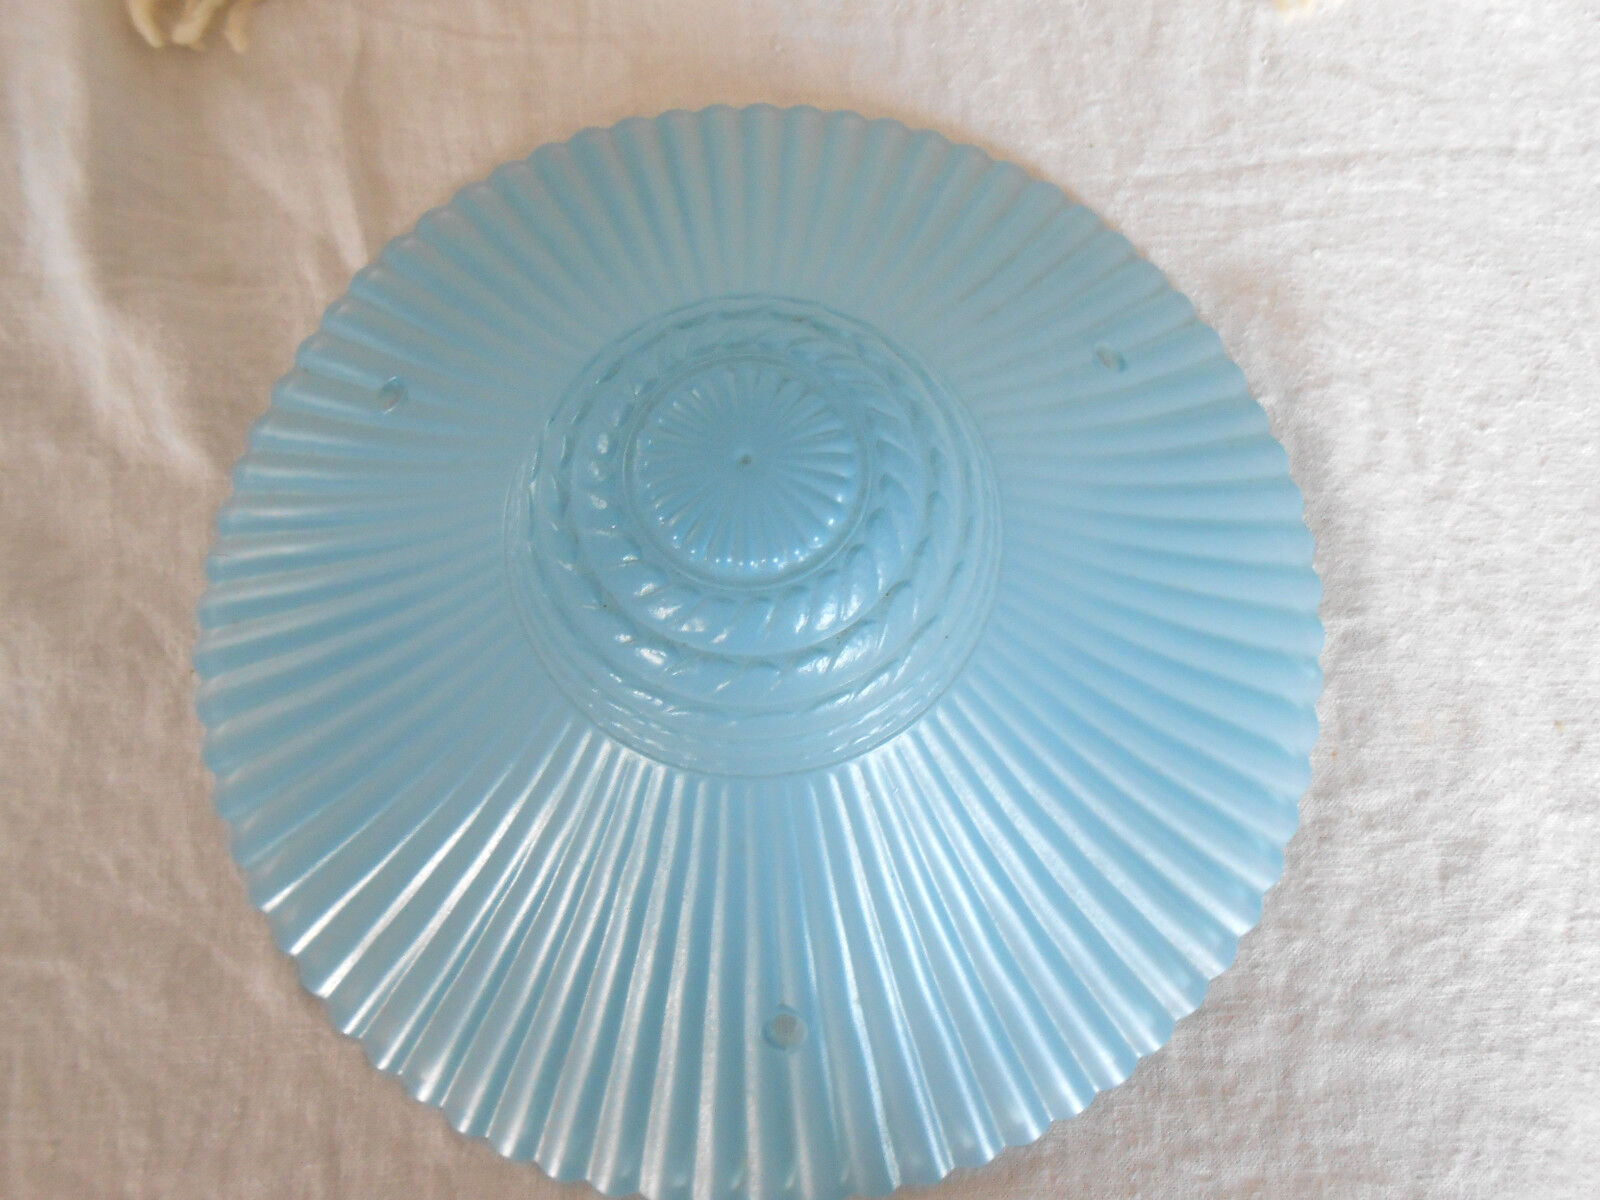 Frosted blue glass ceiling light shade